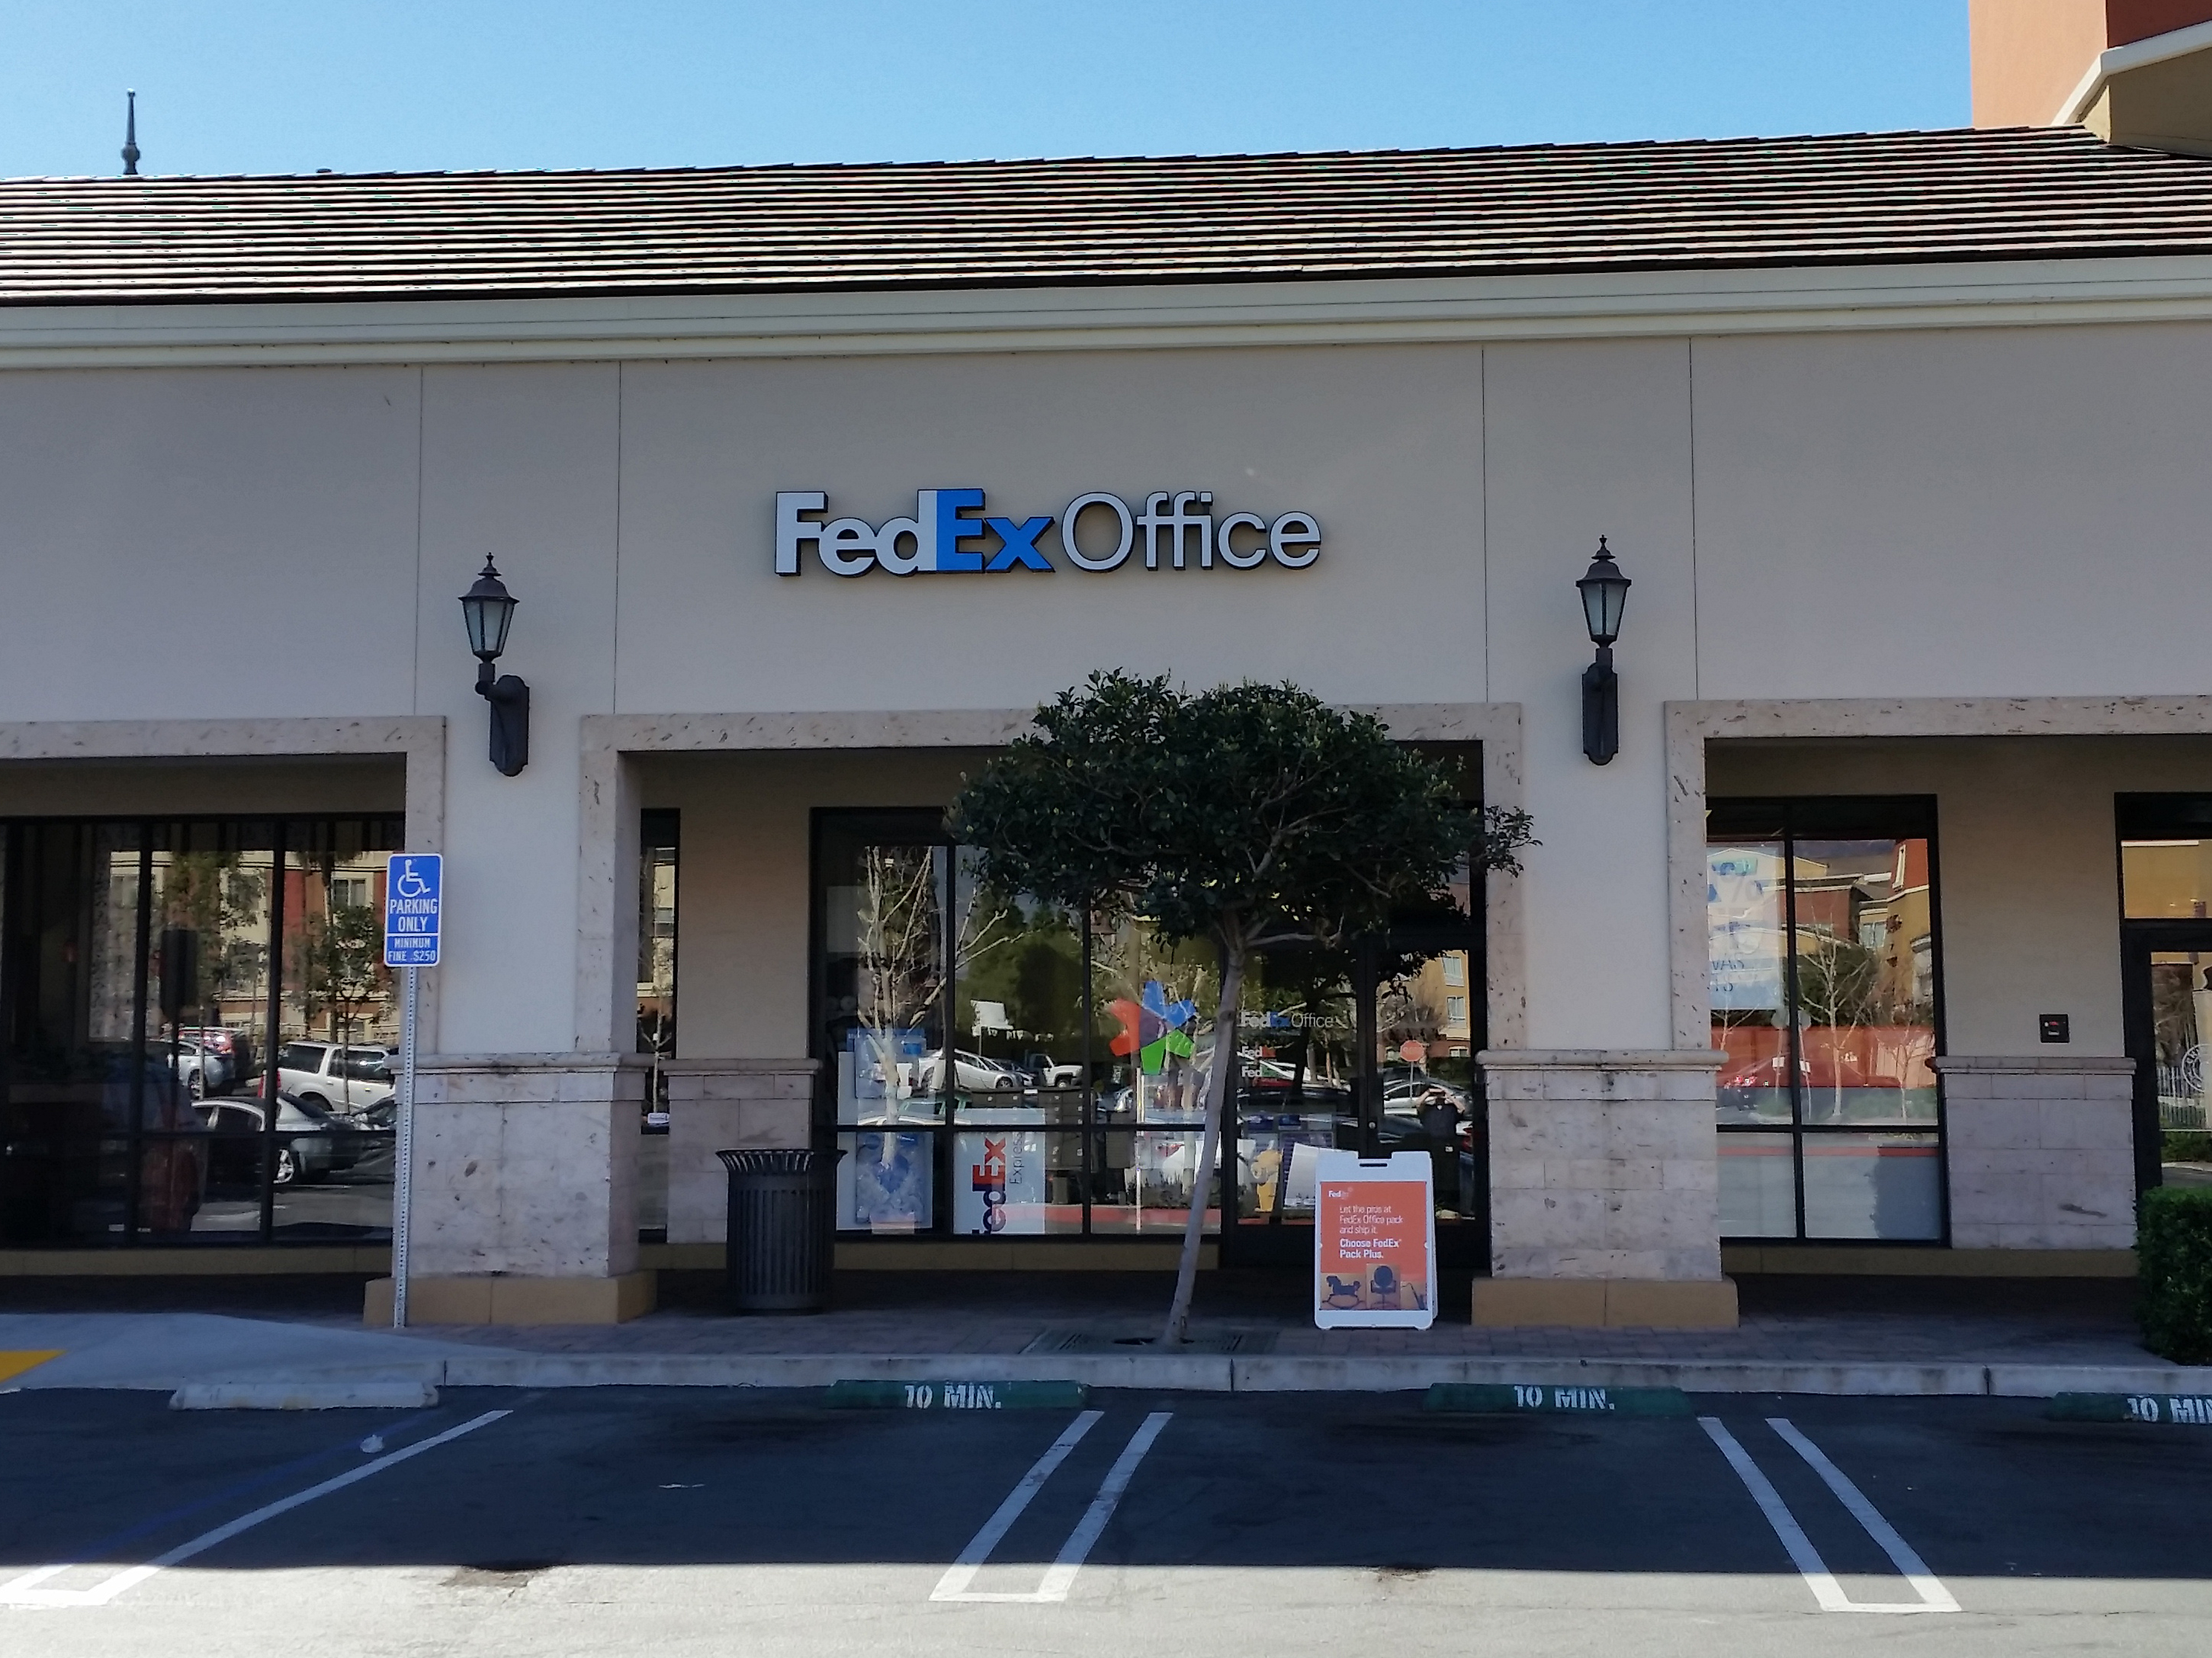 Exterior photo of FedEx Office location at 11334 4th St\t Print quickly and easily in the self-service area at the FedEx Office location 11334 4th St from email, USB, or the cloud\t FedEx Office Print & Go near 11334 4th St\t Shipping boxes and packing services available at FedEx Office 11334 4th St\t Get banners, signs, posters and prints at FedEx Office 11334 4th St\t Full service printing and packing at FedEx Office 11334 4th St\t Drop off FedEx packages near 11334 4th St\t FedEx shipping near 11334 4th St